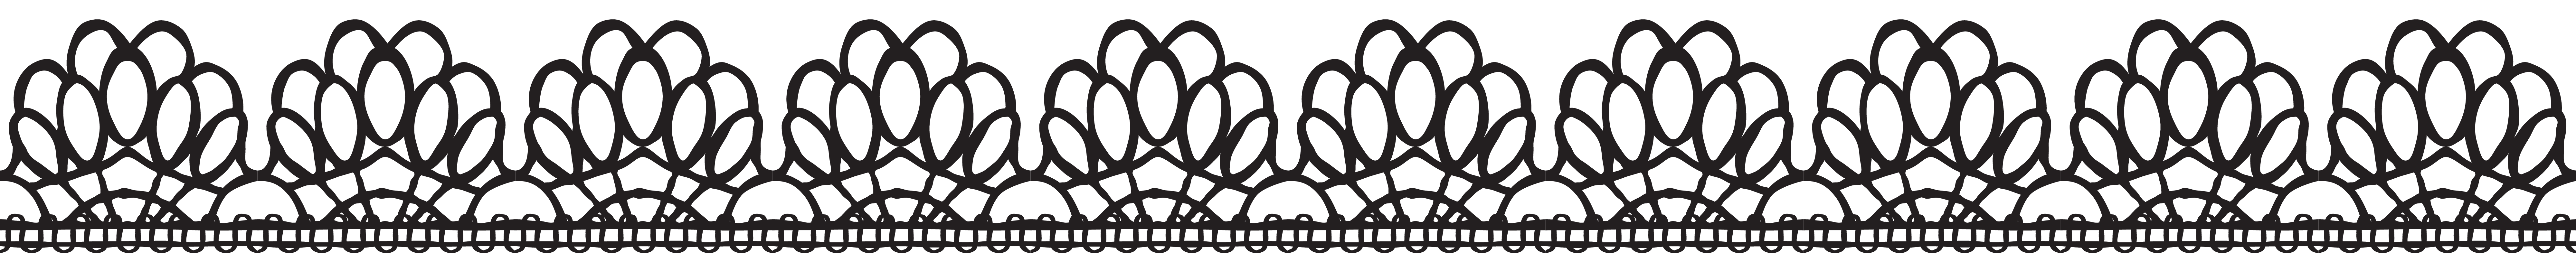 White lace border png. Black and steel pattern